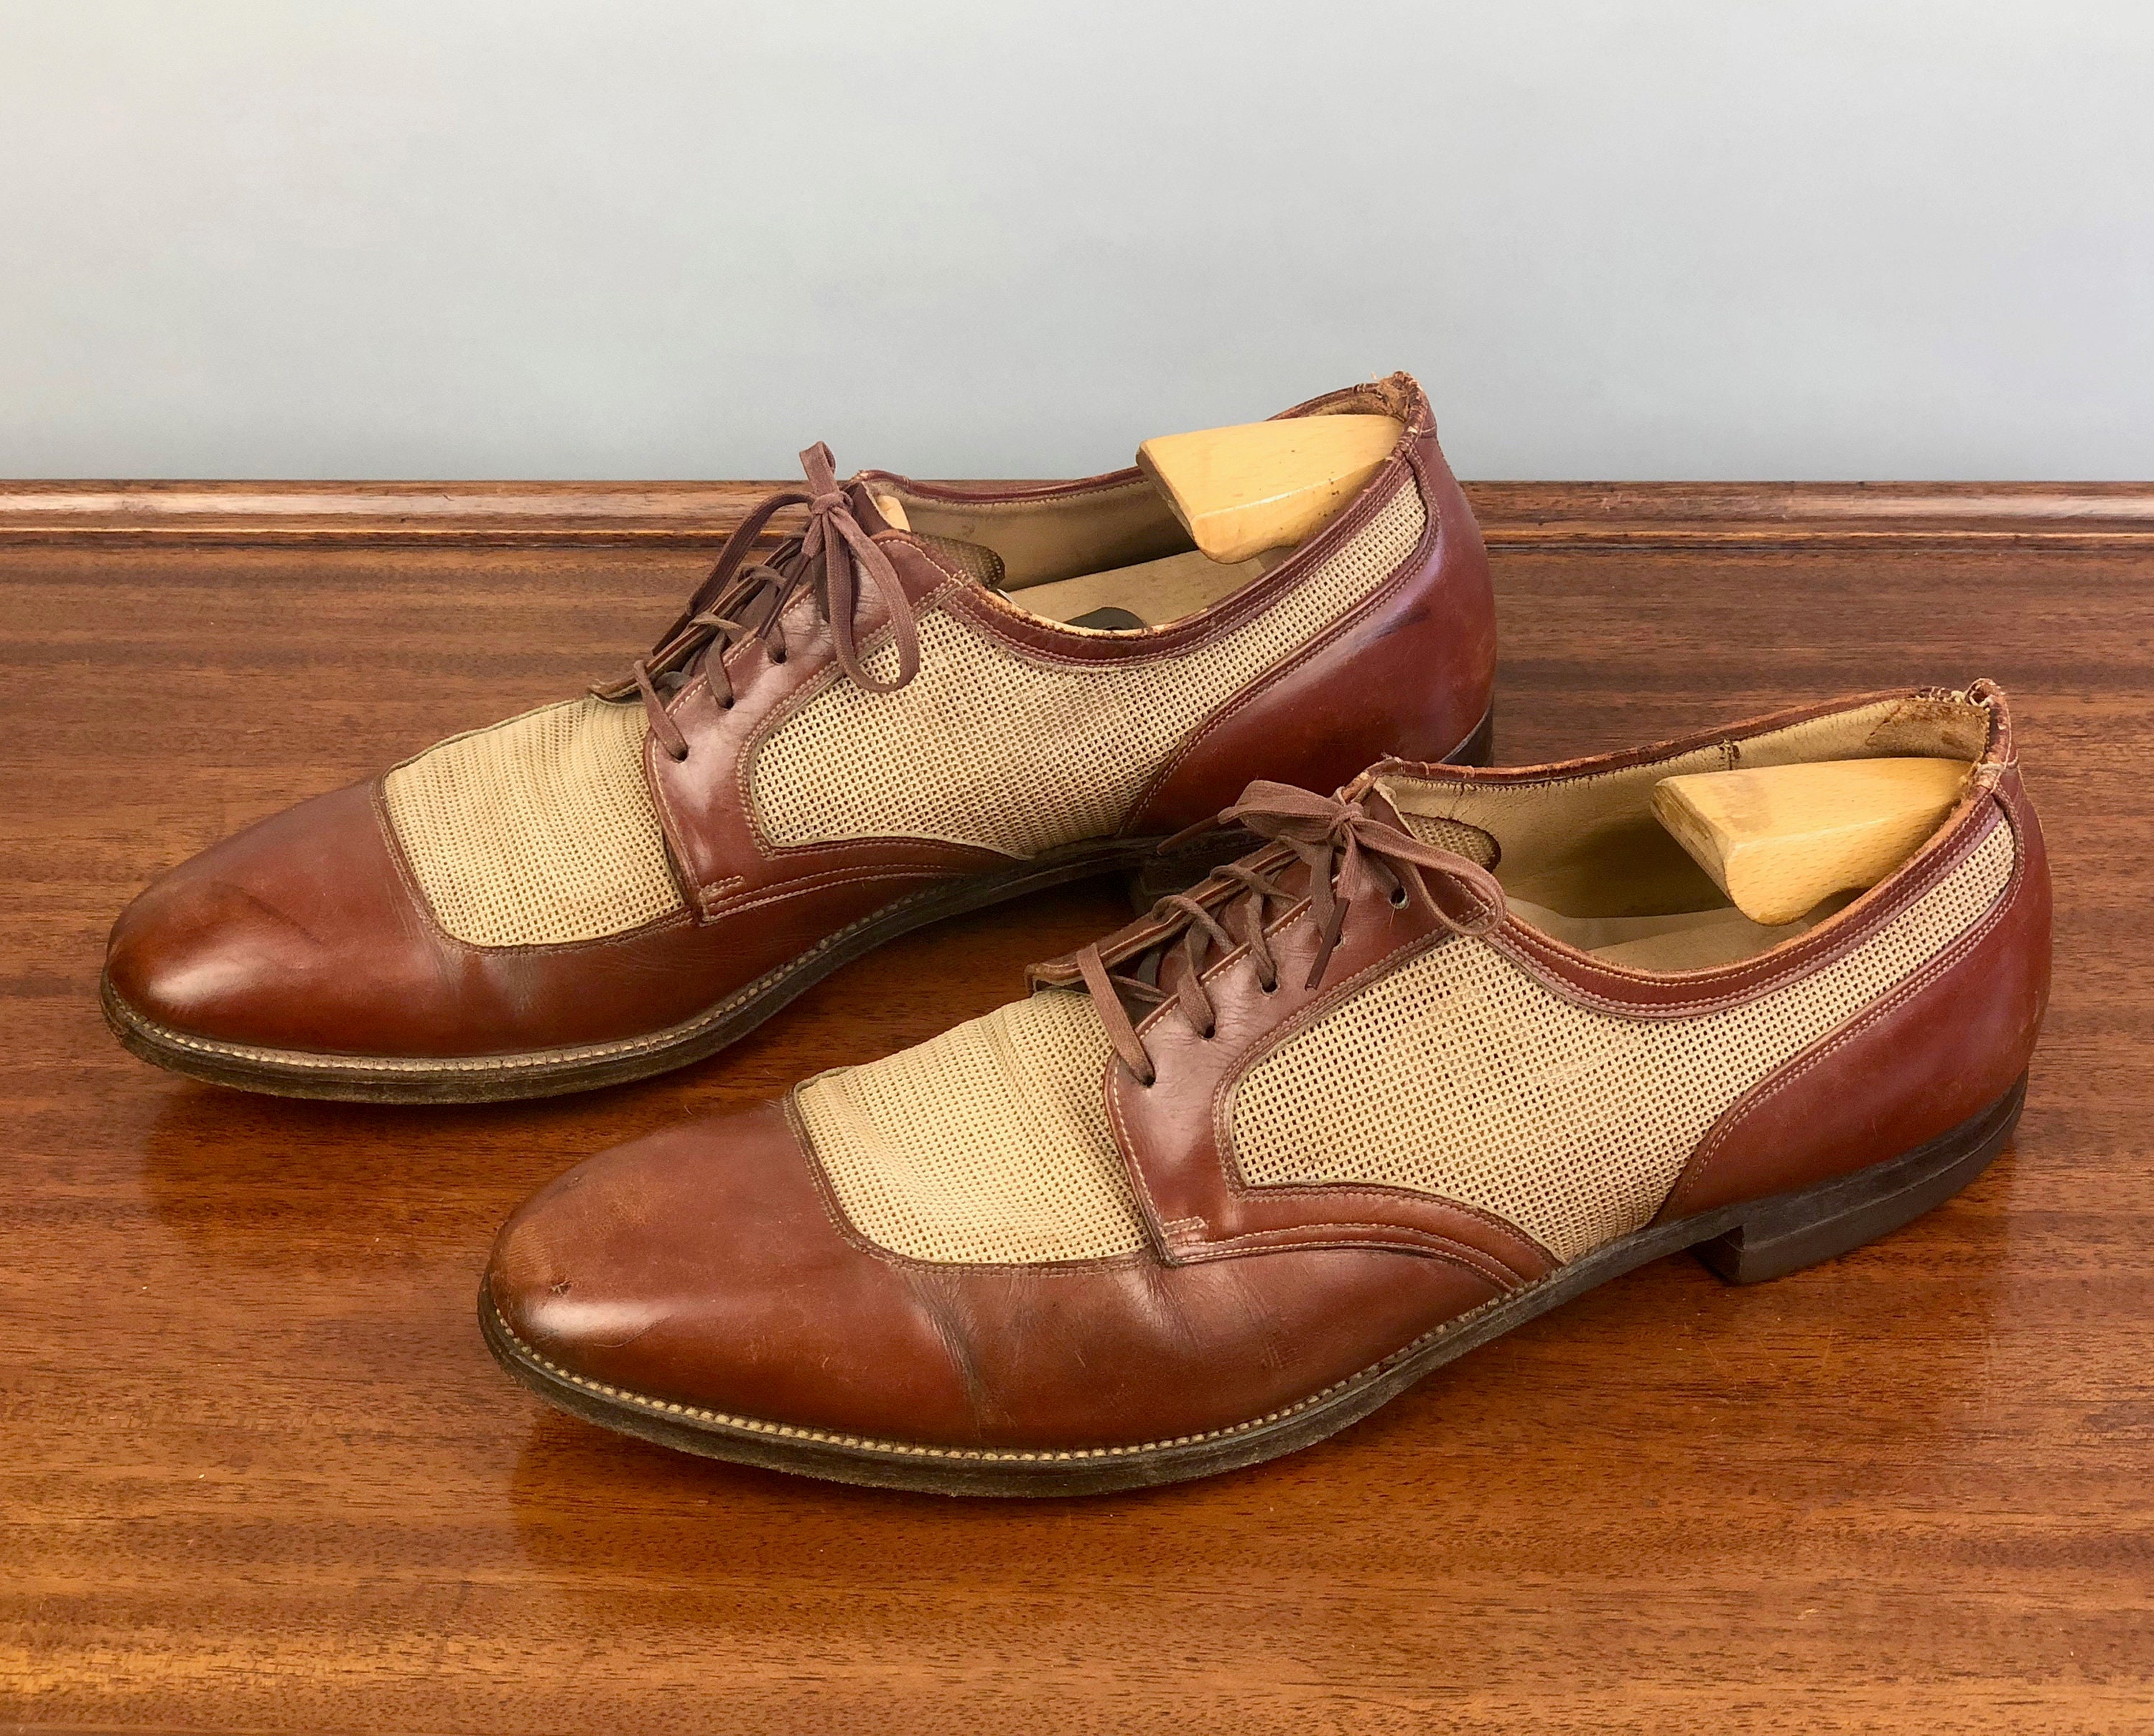 Emily's Vintage Visions: A Pair of 1940s Shoes